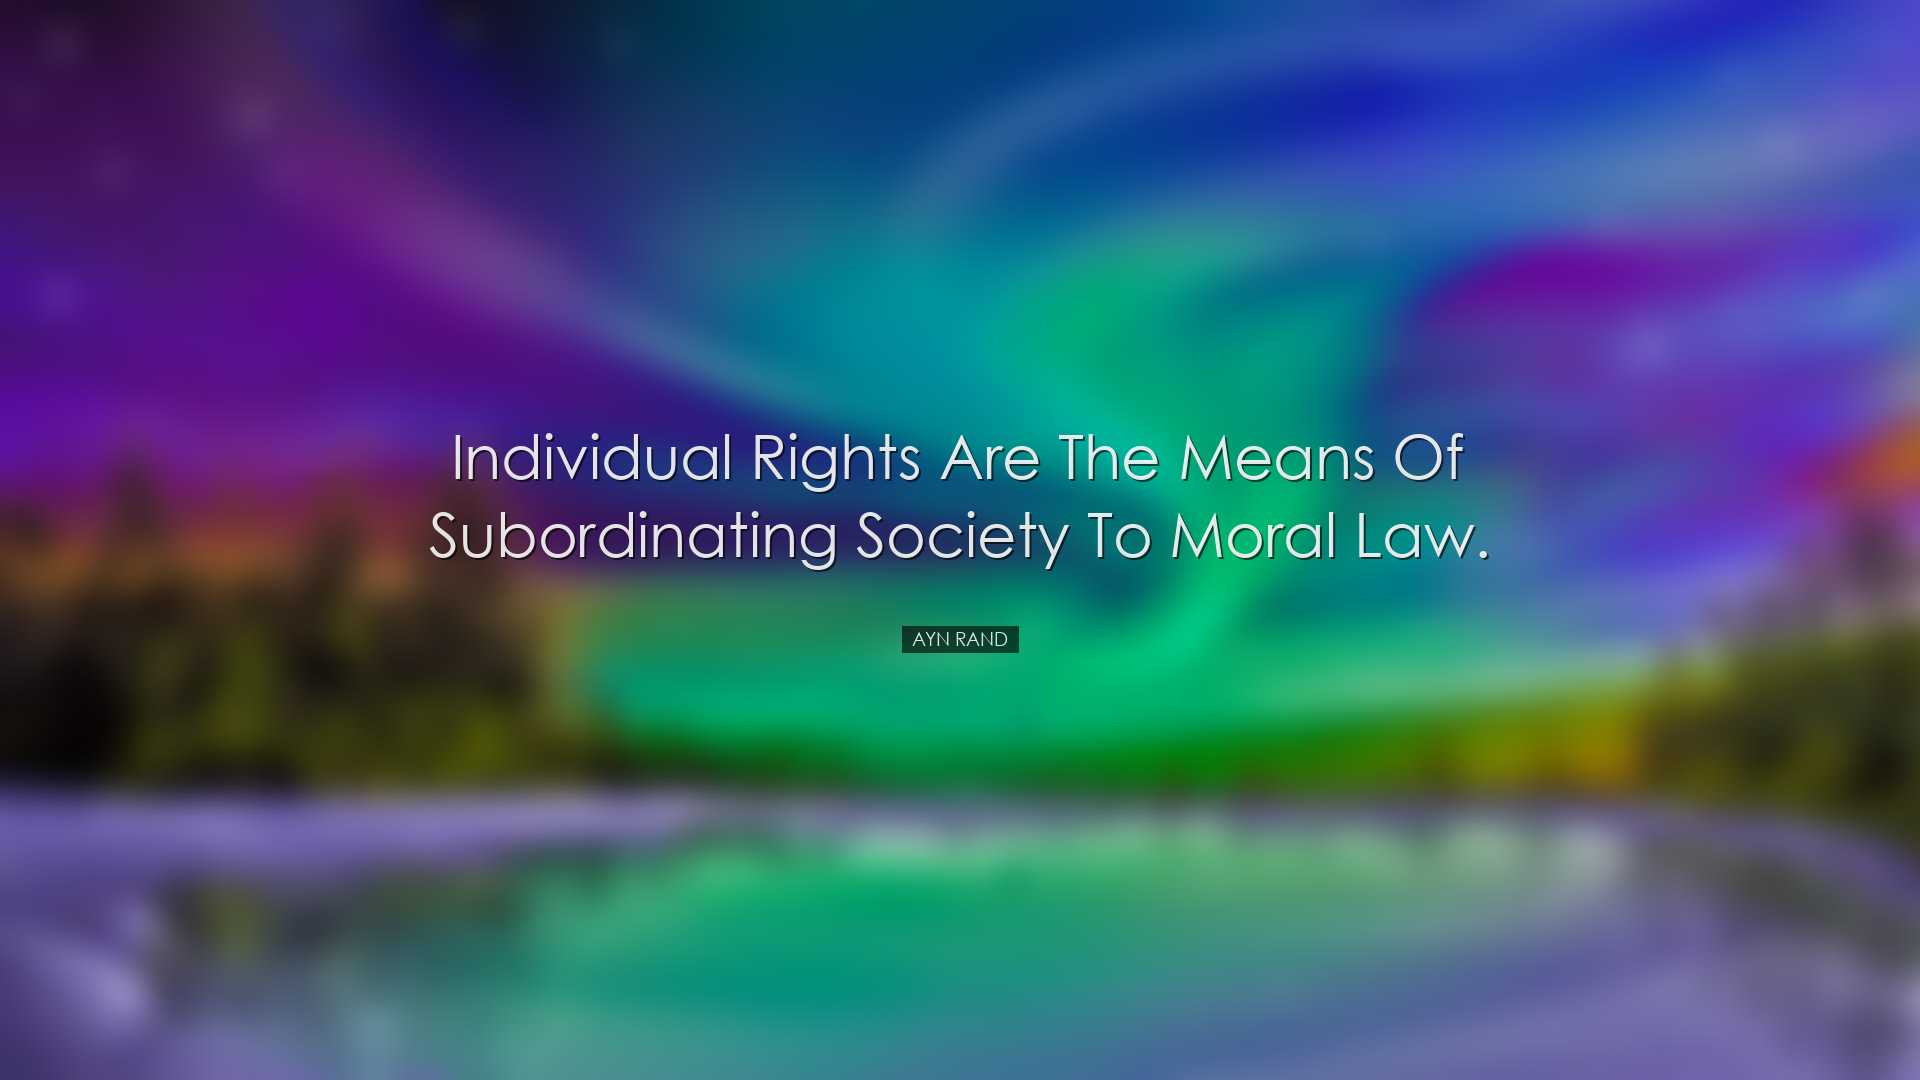 Individual rights are the means of subordinating society to moral